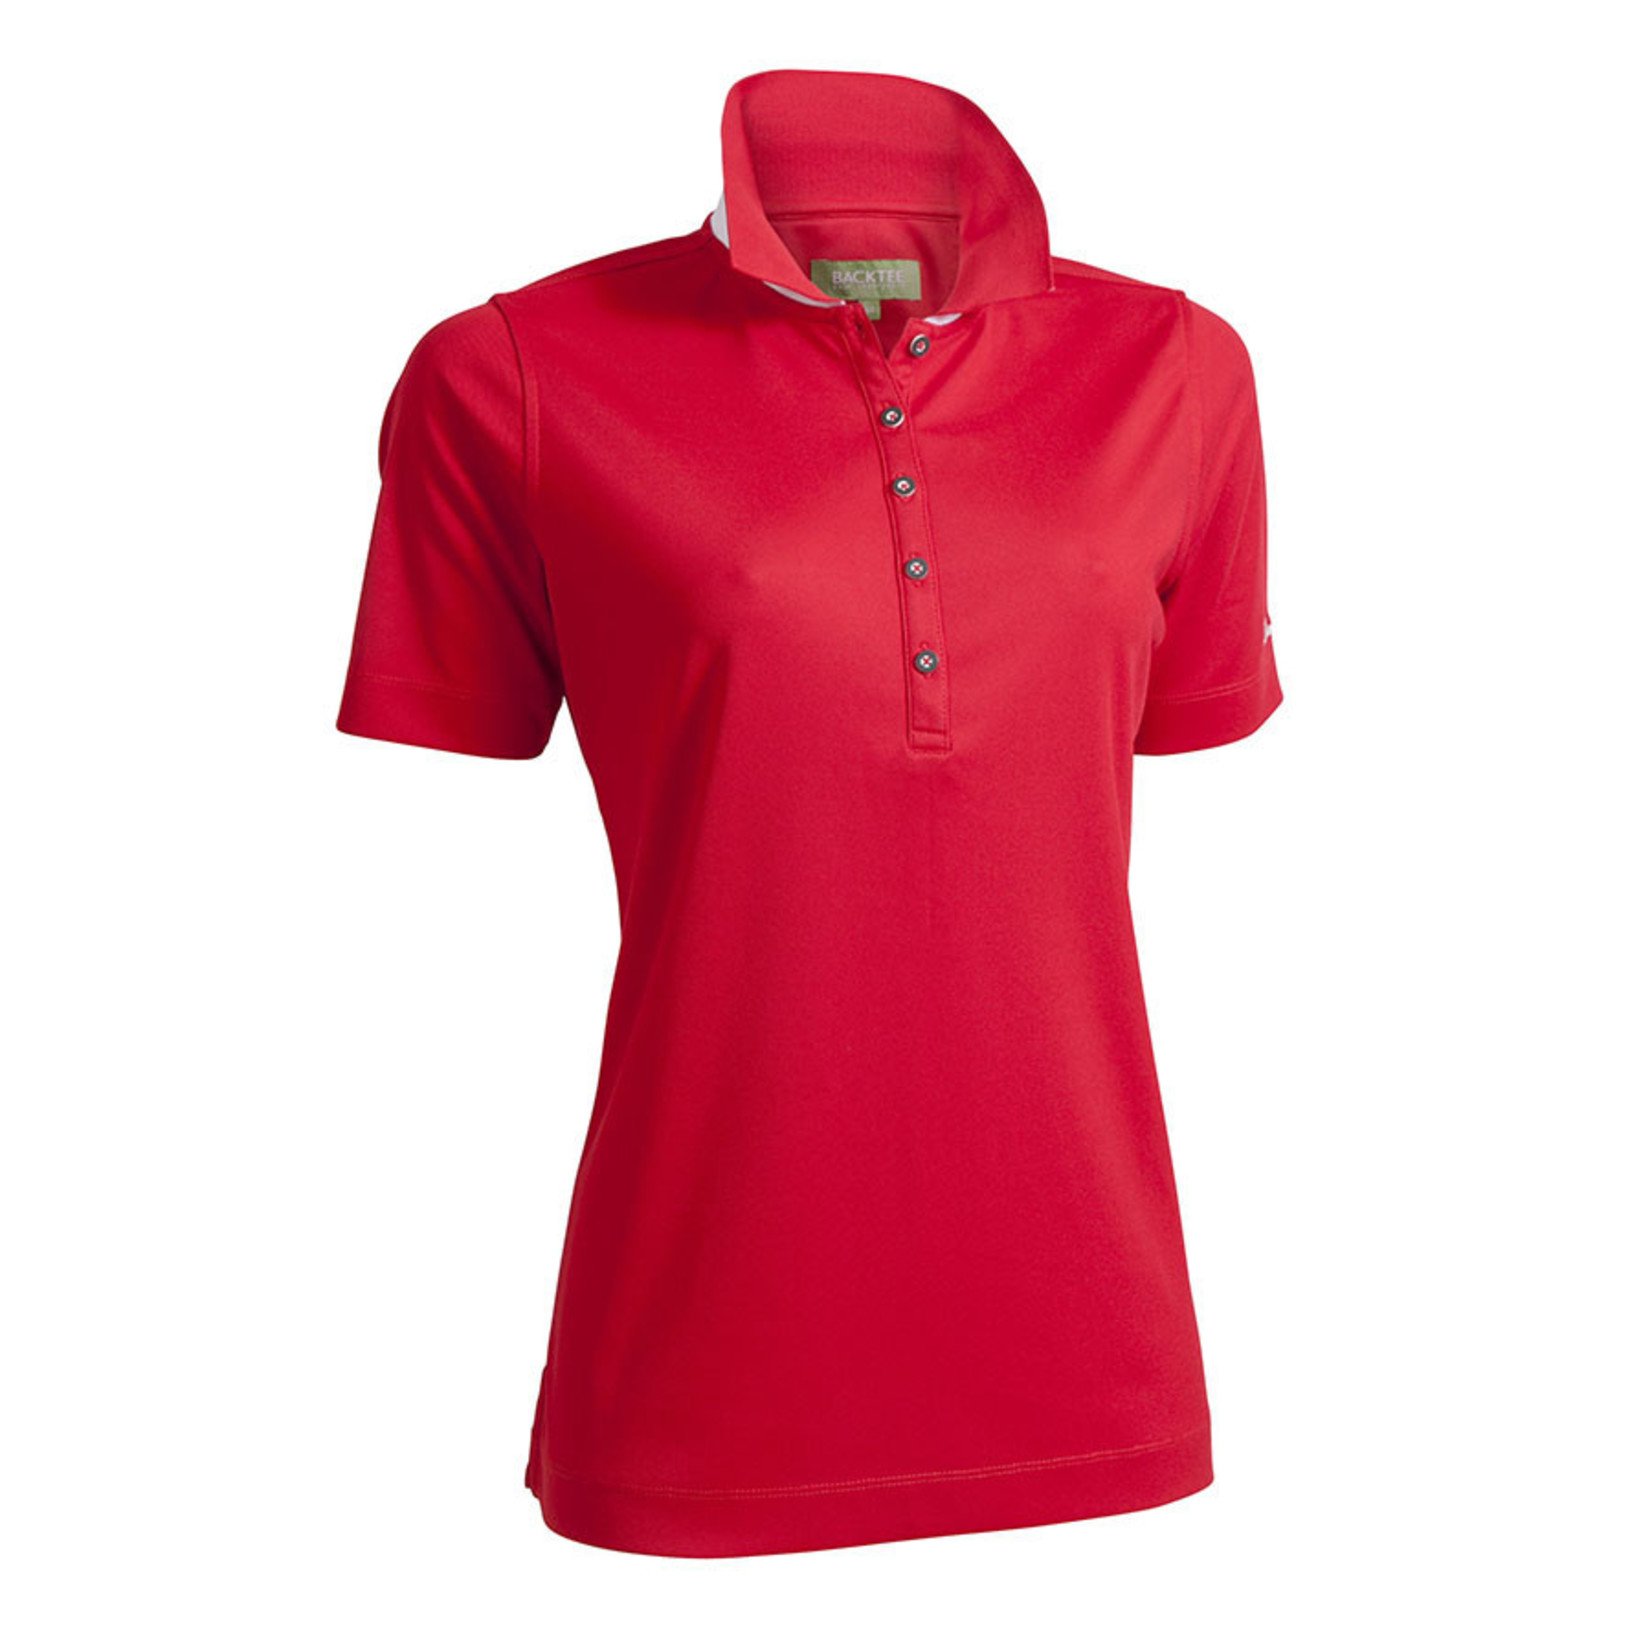 Backtee Backtee Ladies Quick Dry Perf Polo NAVY